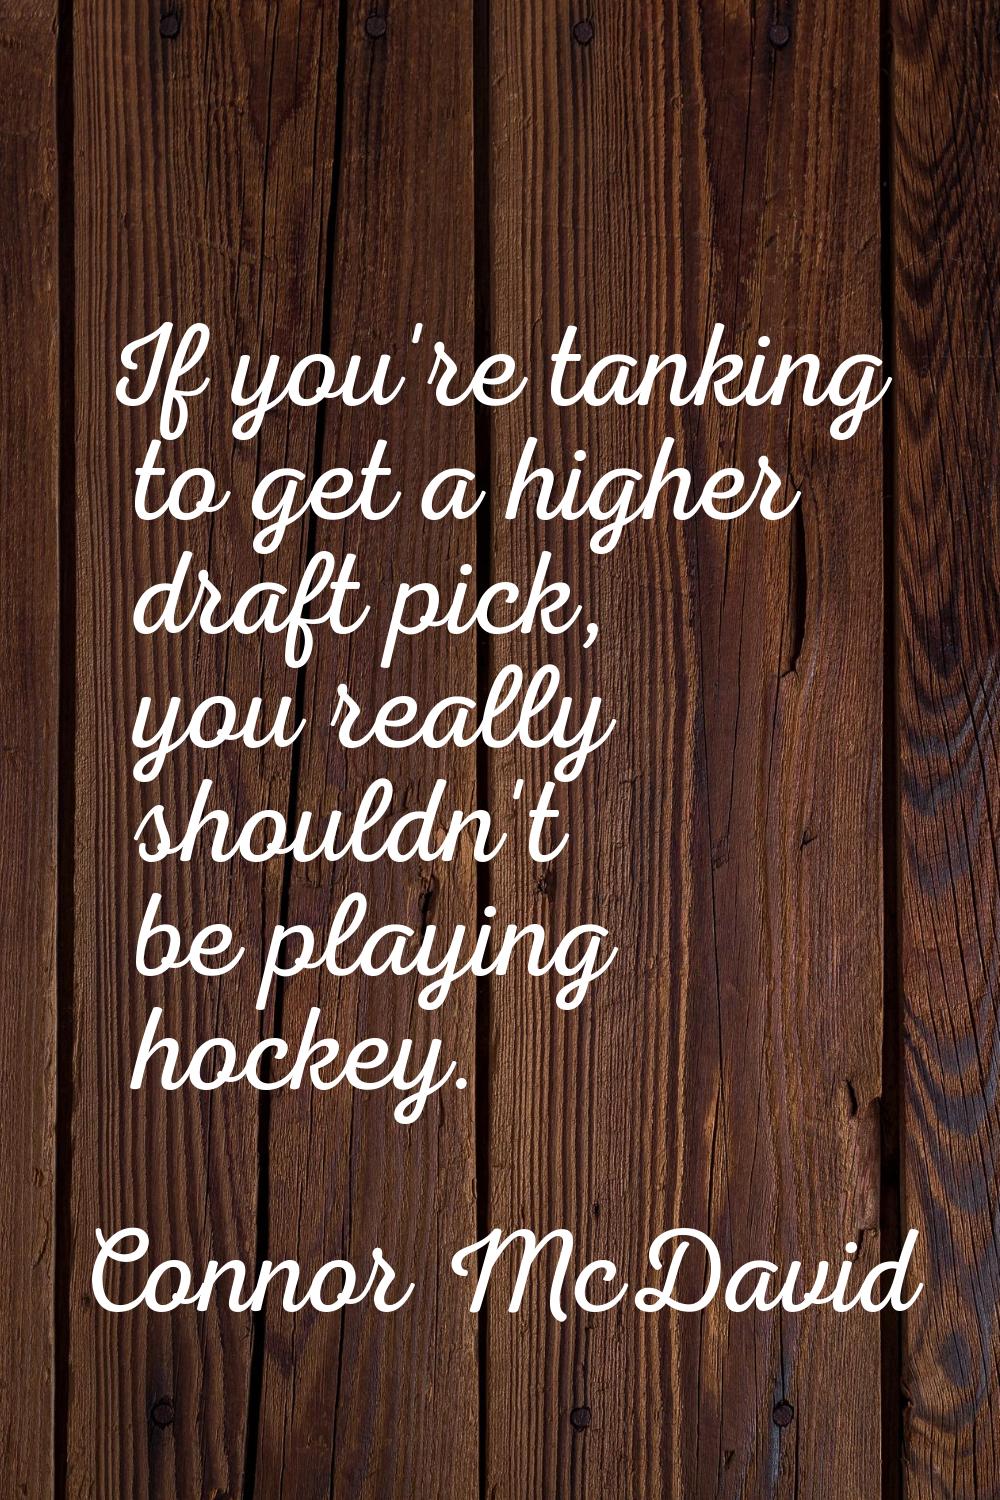 If you're tanking to get a higher draft pick, you really shouldn't be playing hockey.